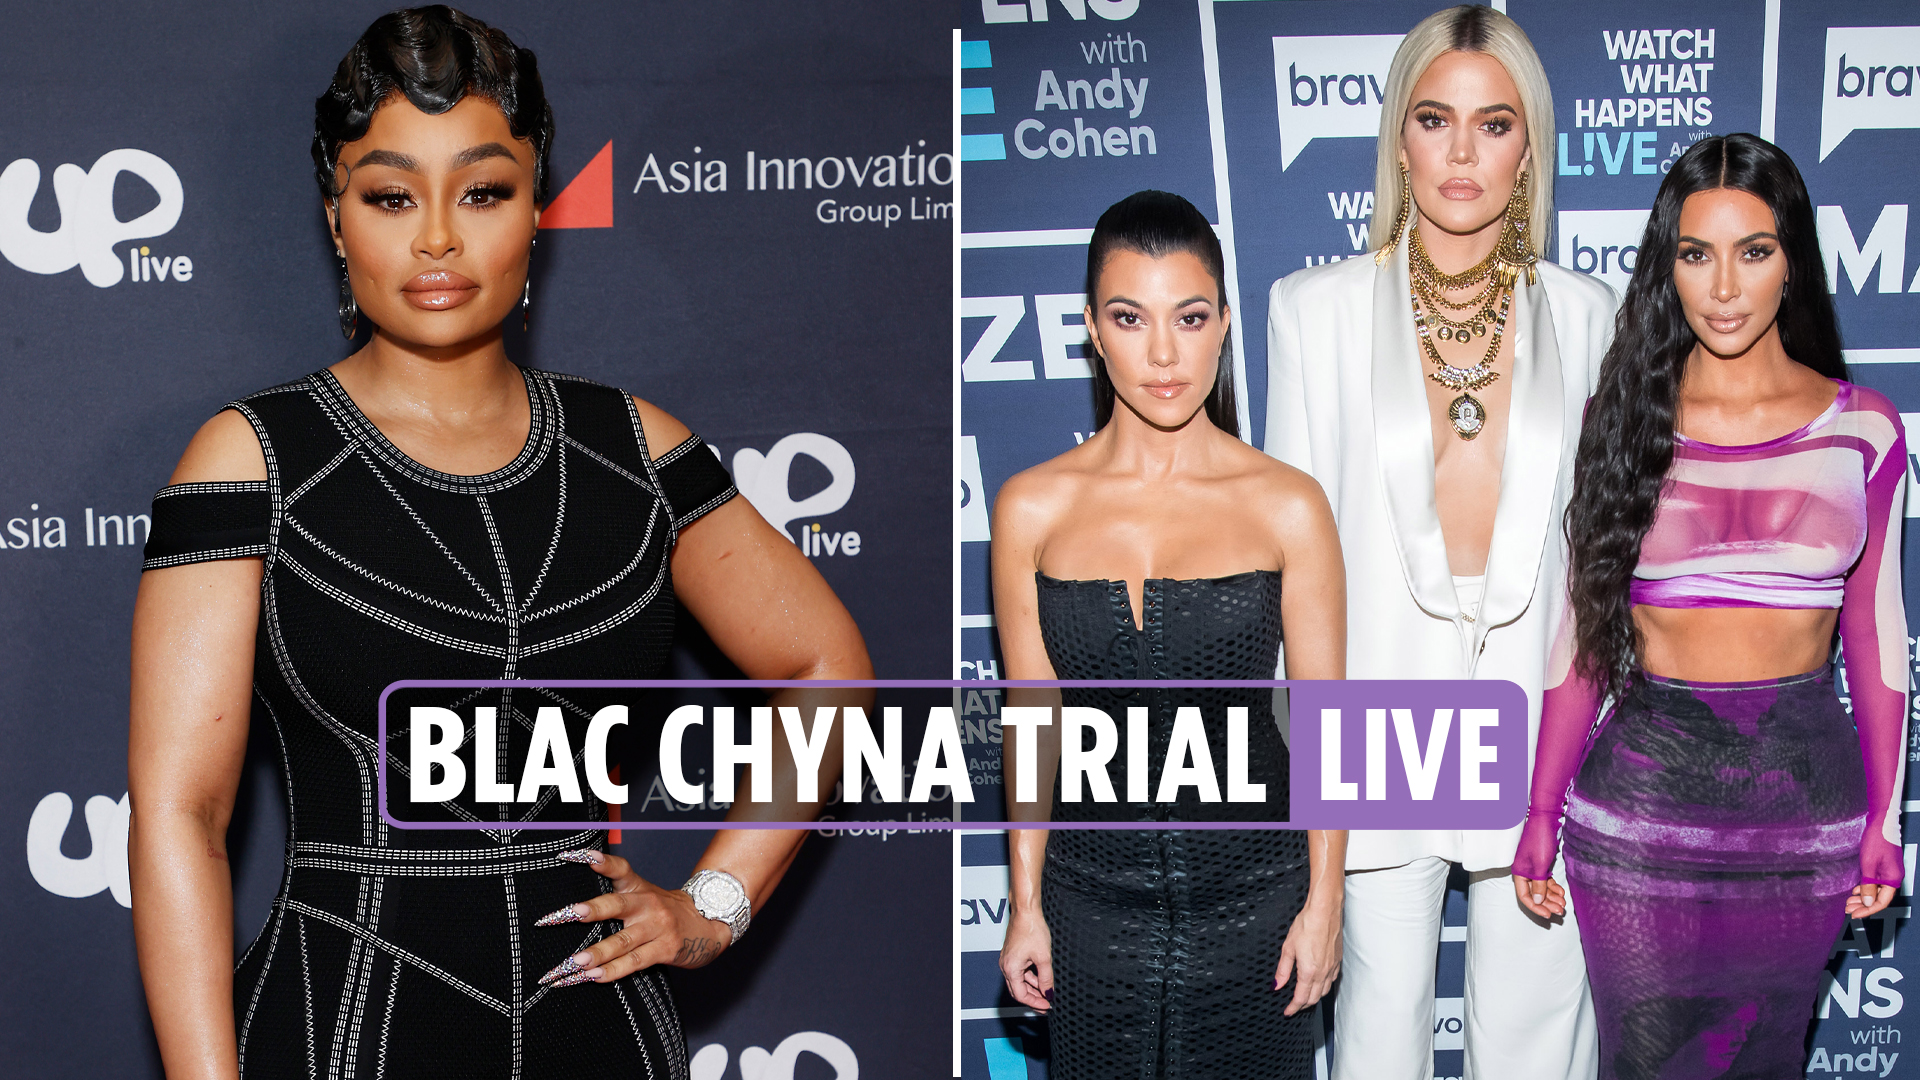 Blac Chyna accused of shouting 'I'm going to kill you' at Rob during trial